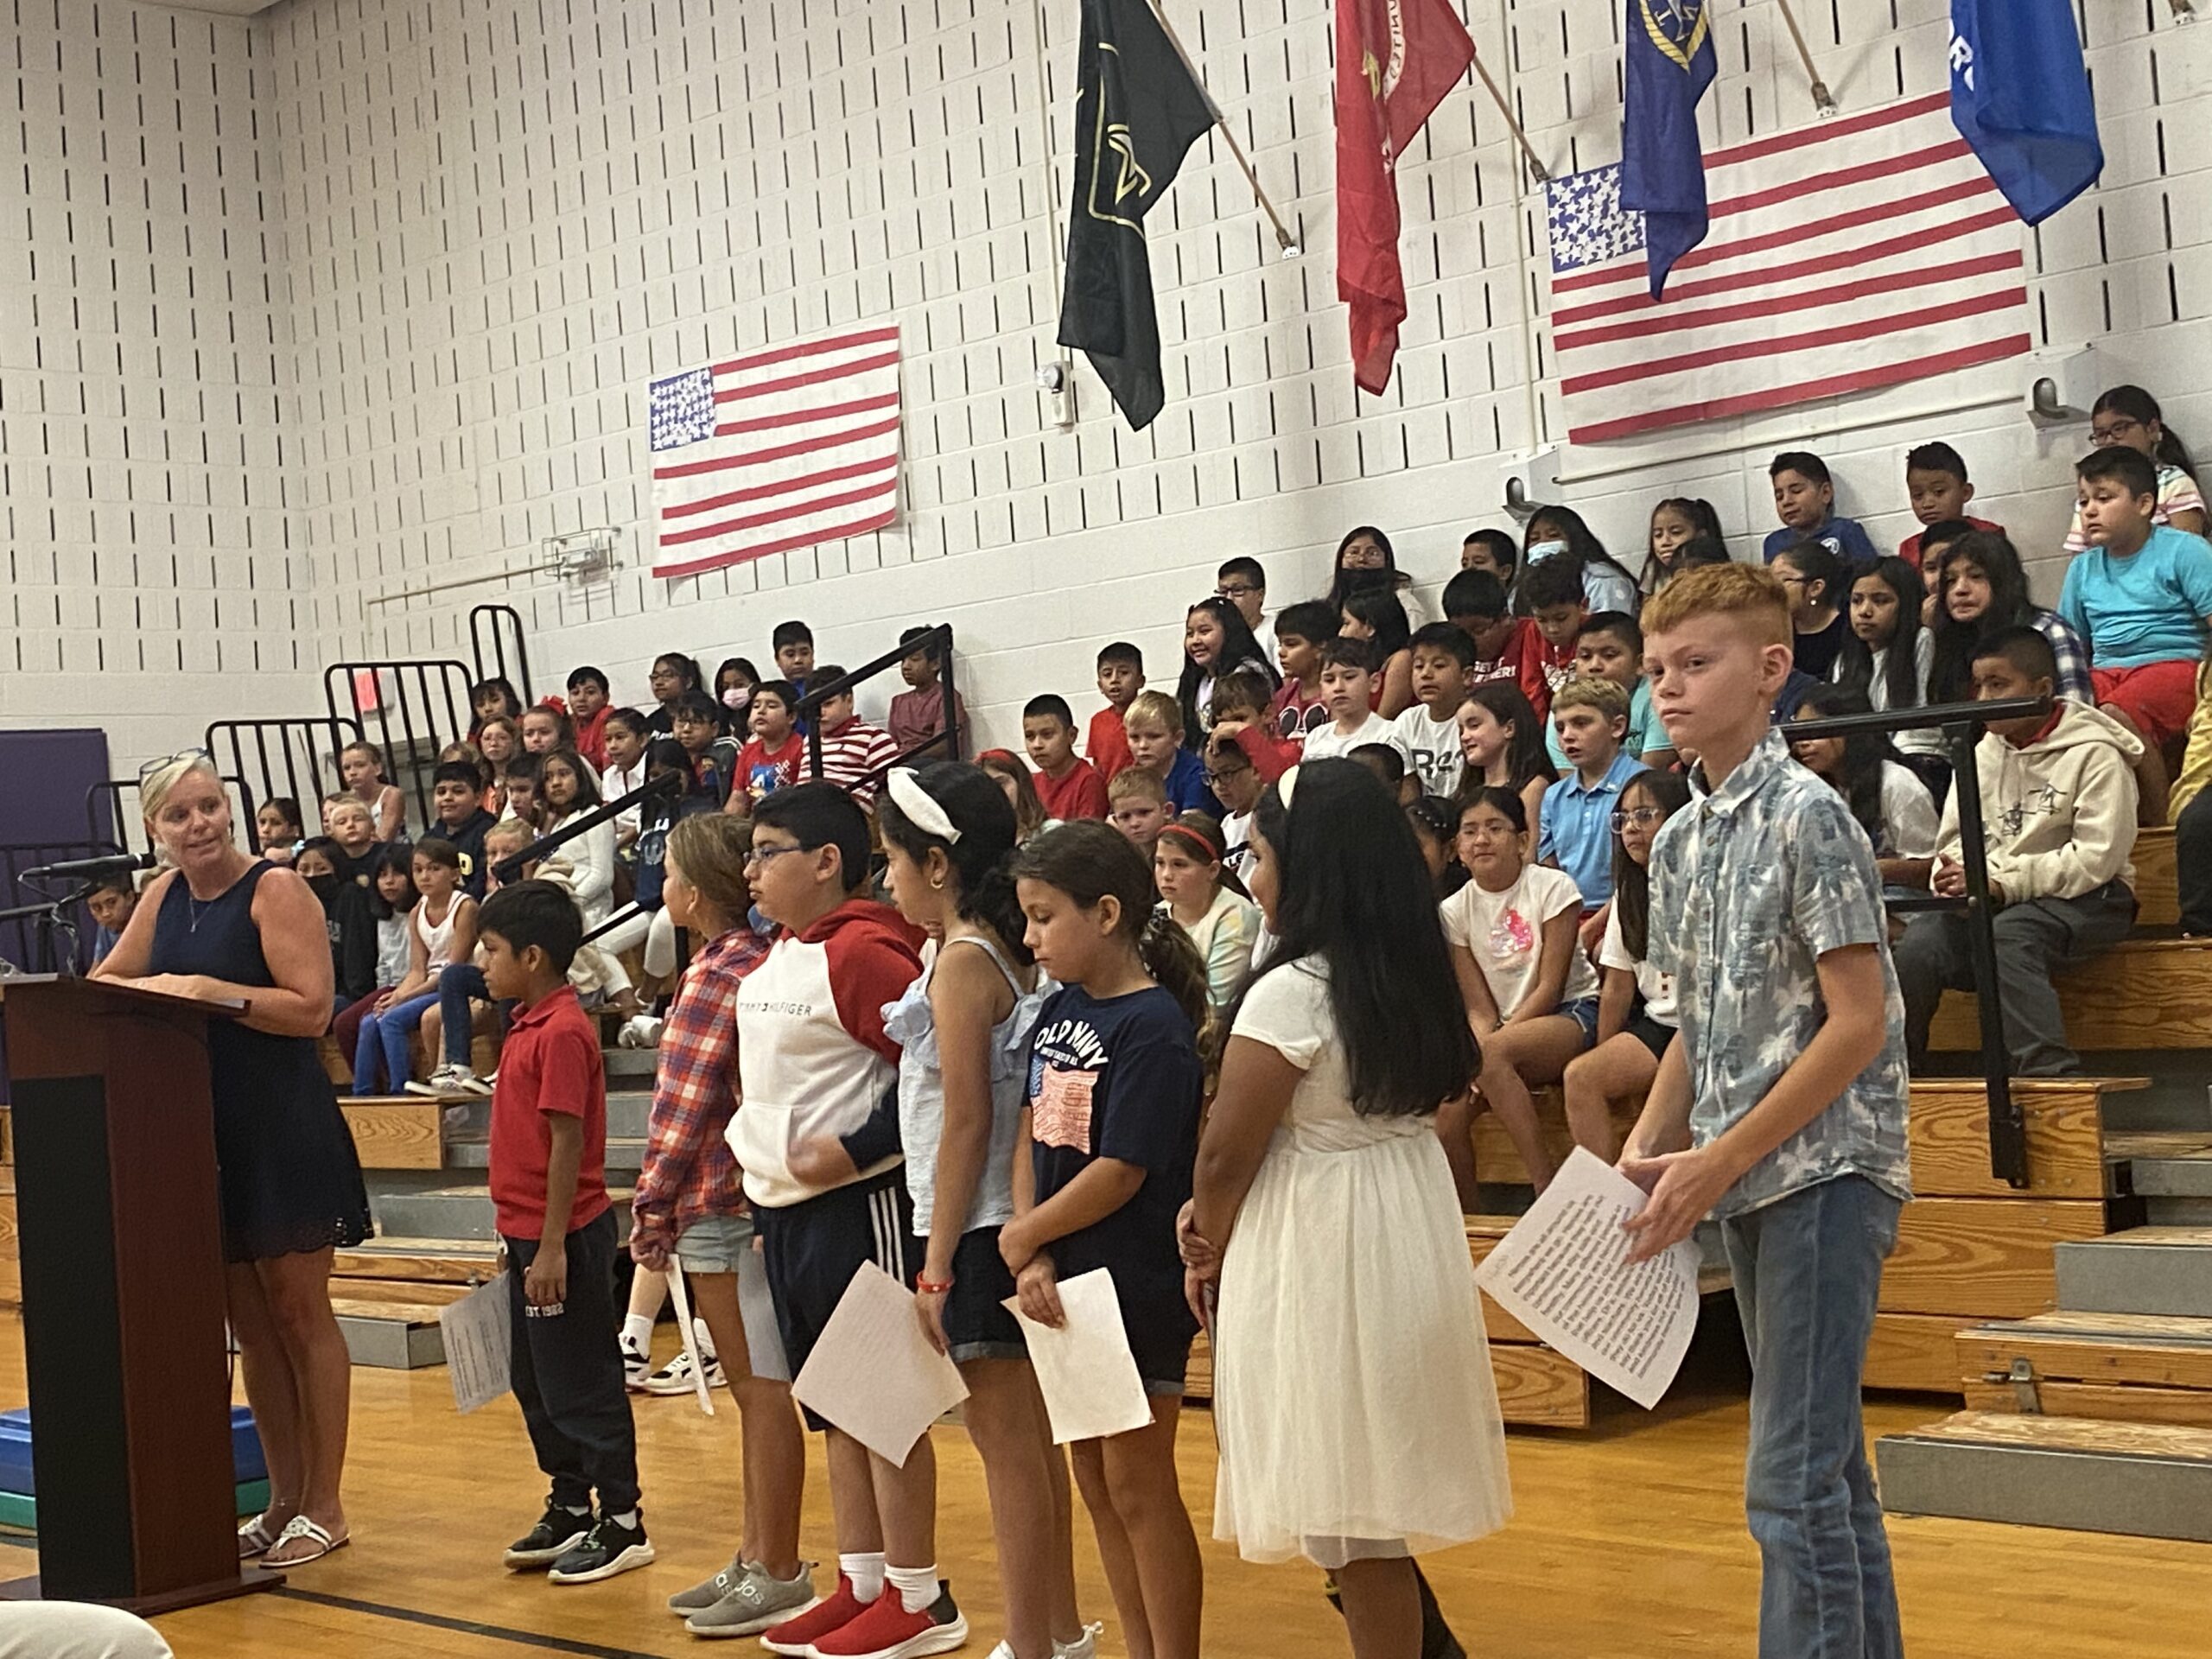 Hampton Bays Elementary School marked September 11 during a memorial ceremony on September 9. Fourth grade students read poems that they wrote about what it means to be a hero and the Hampton Bays Fire Department presented a memorial wreath. COURTESY HAMPTON BAYS SCHOOL DISTRICT